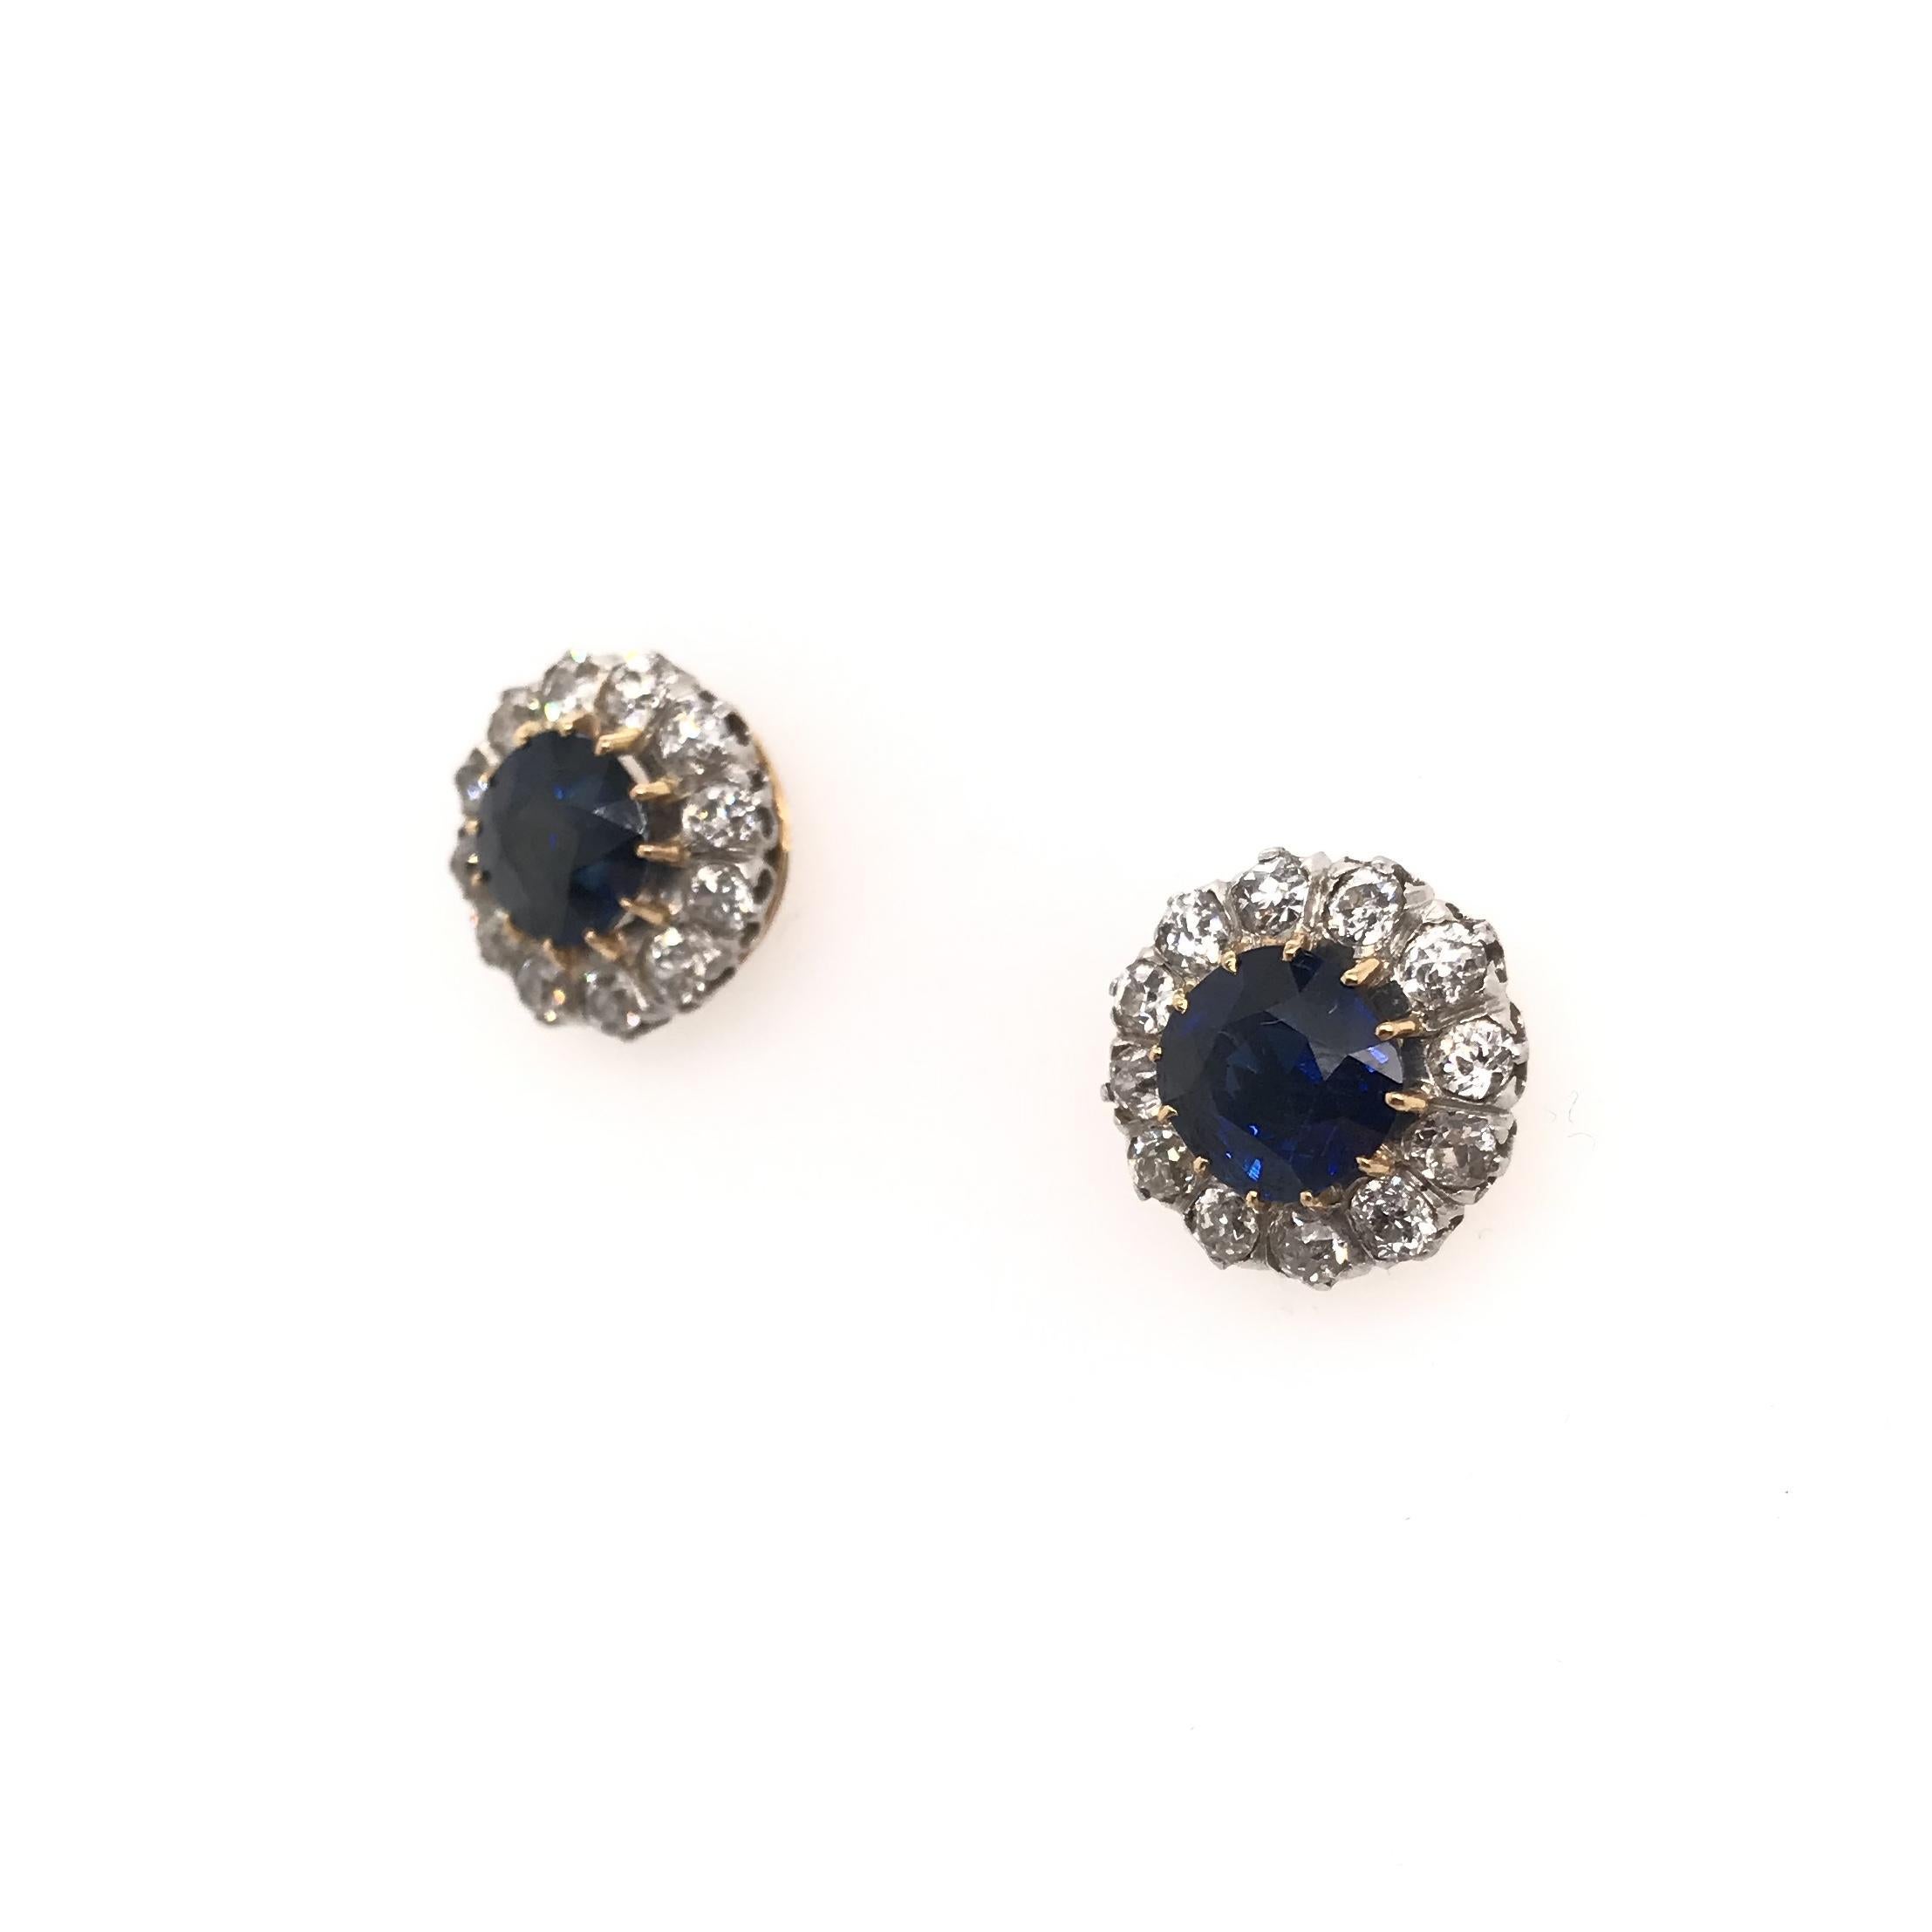 Antique Edwardian Sapphire and Diamond Earrings 9